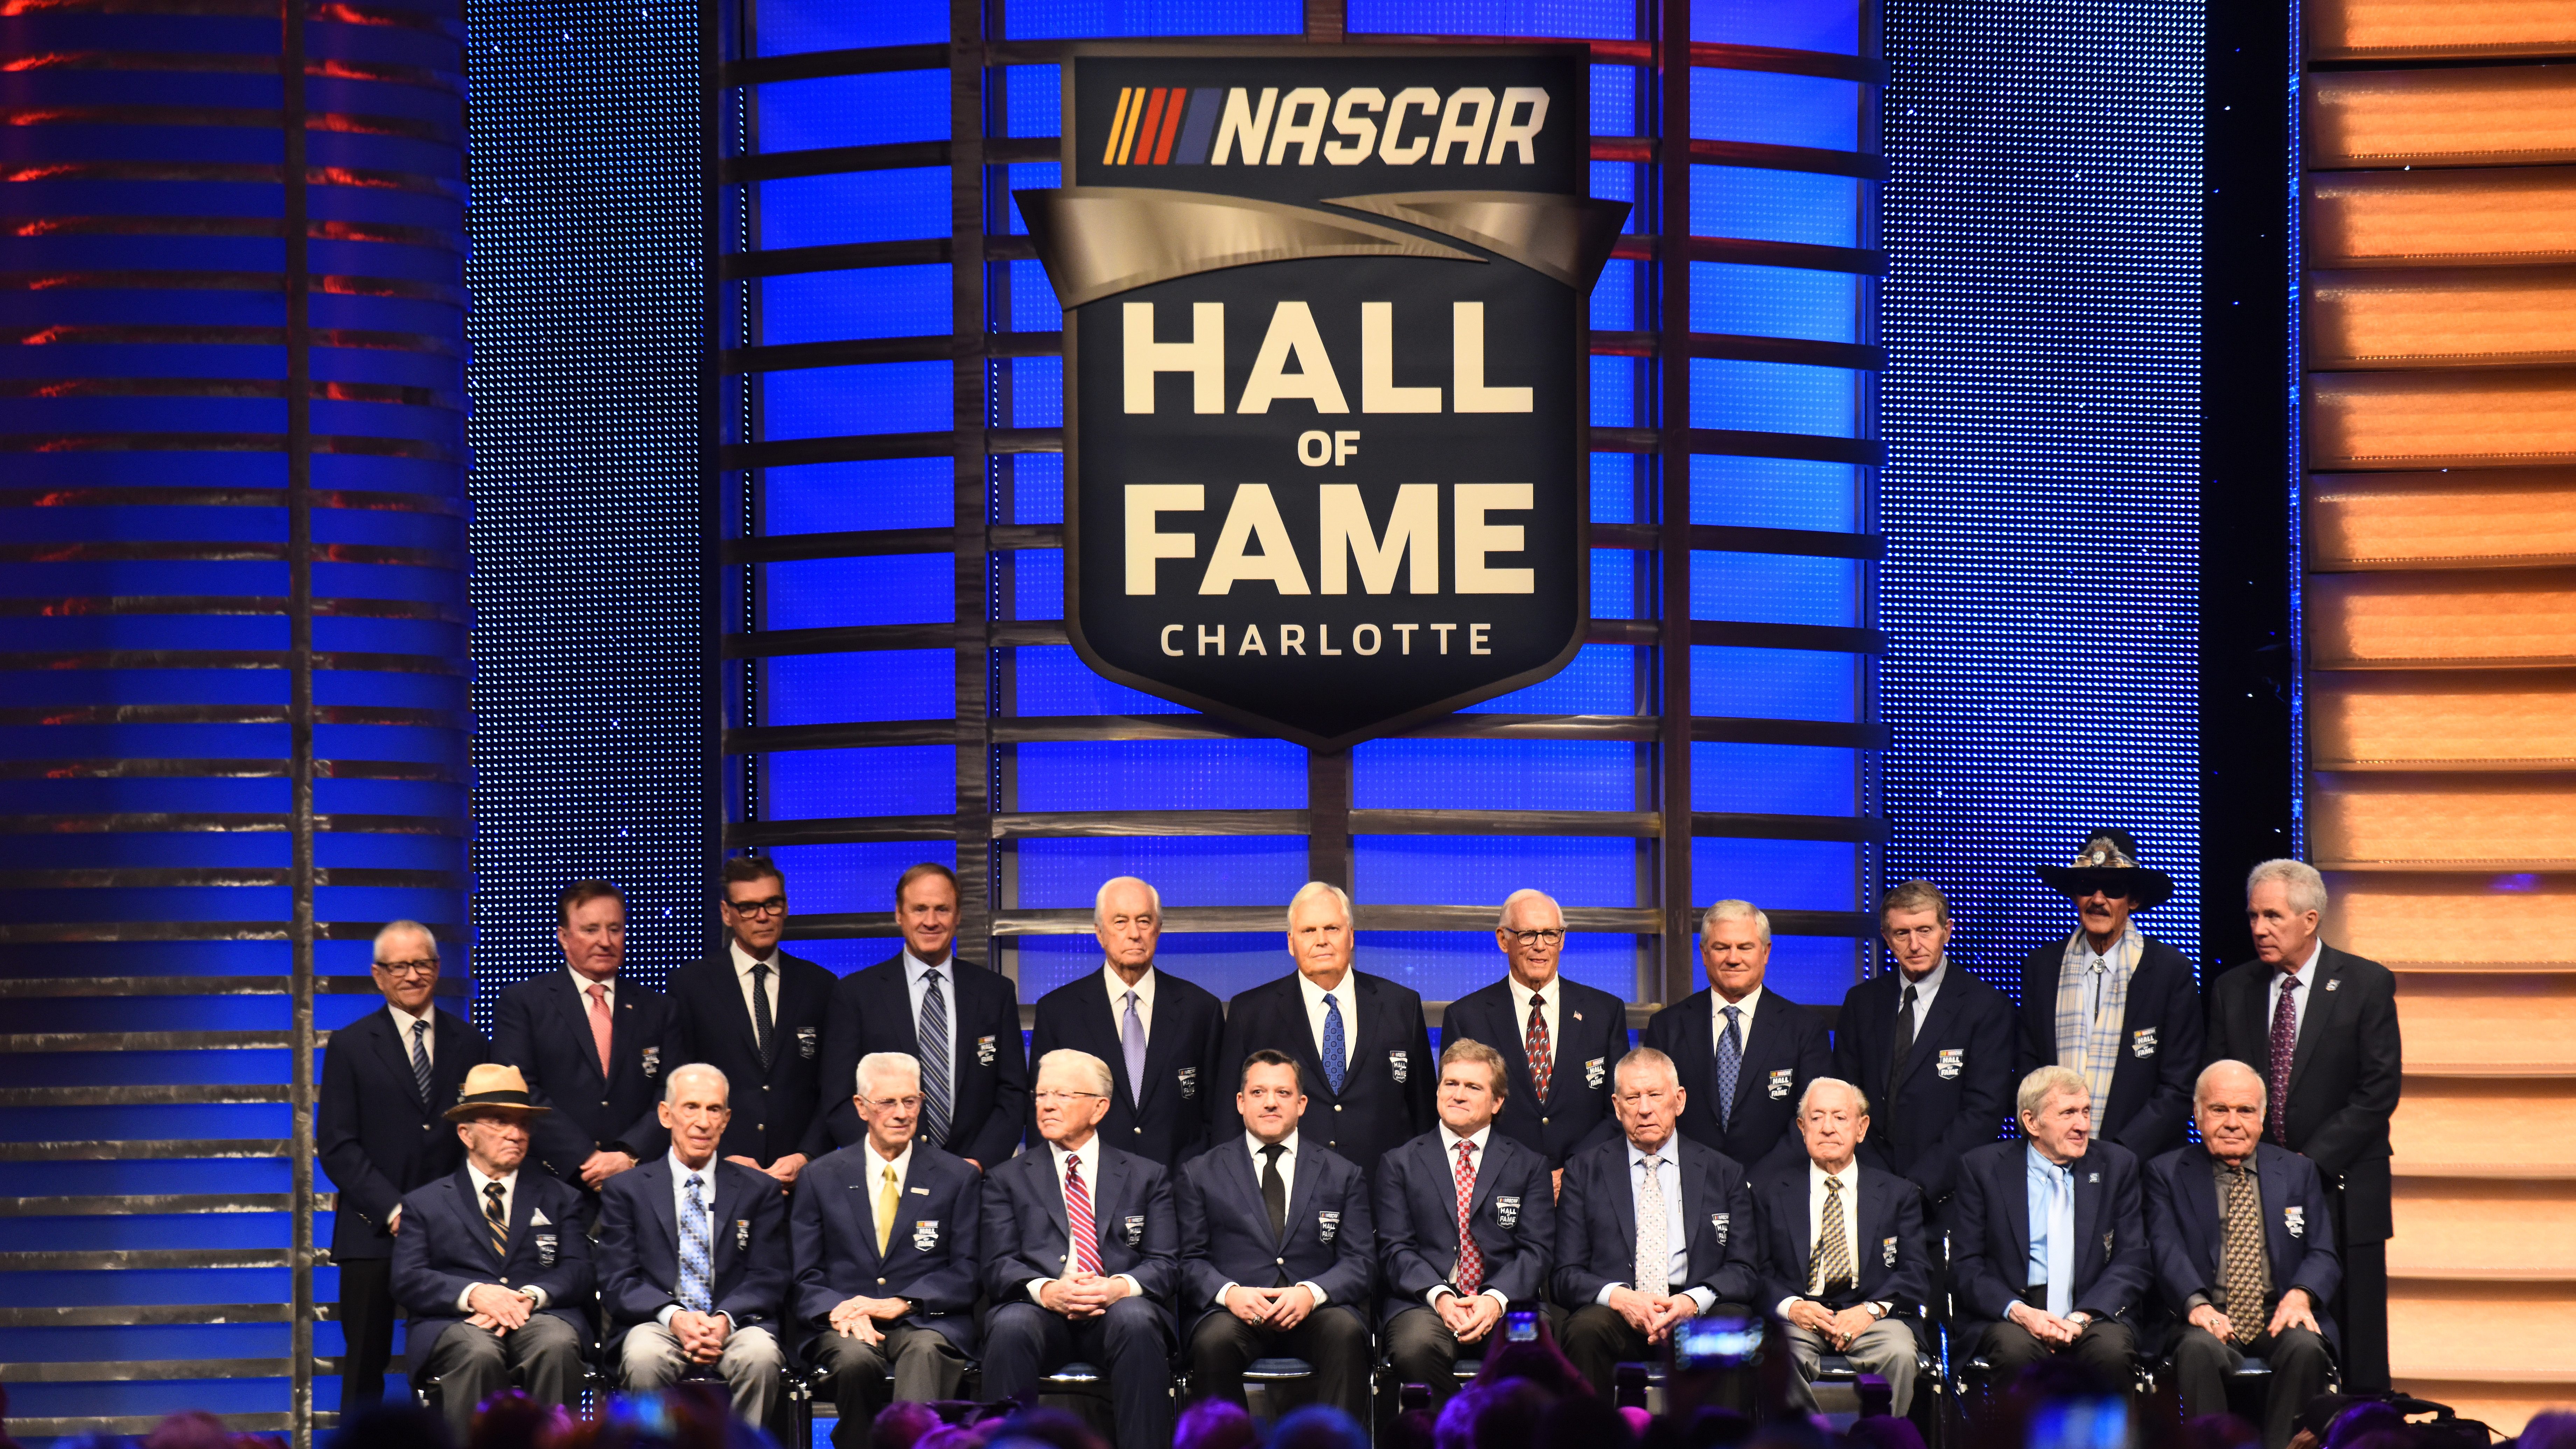 Nascar Awards Banquet 2022 Schedule Nascar Hall Of Fame Ceremony: How To Watch & What Time | Heavy.com